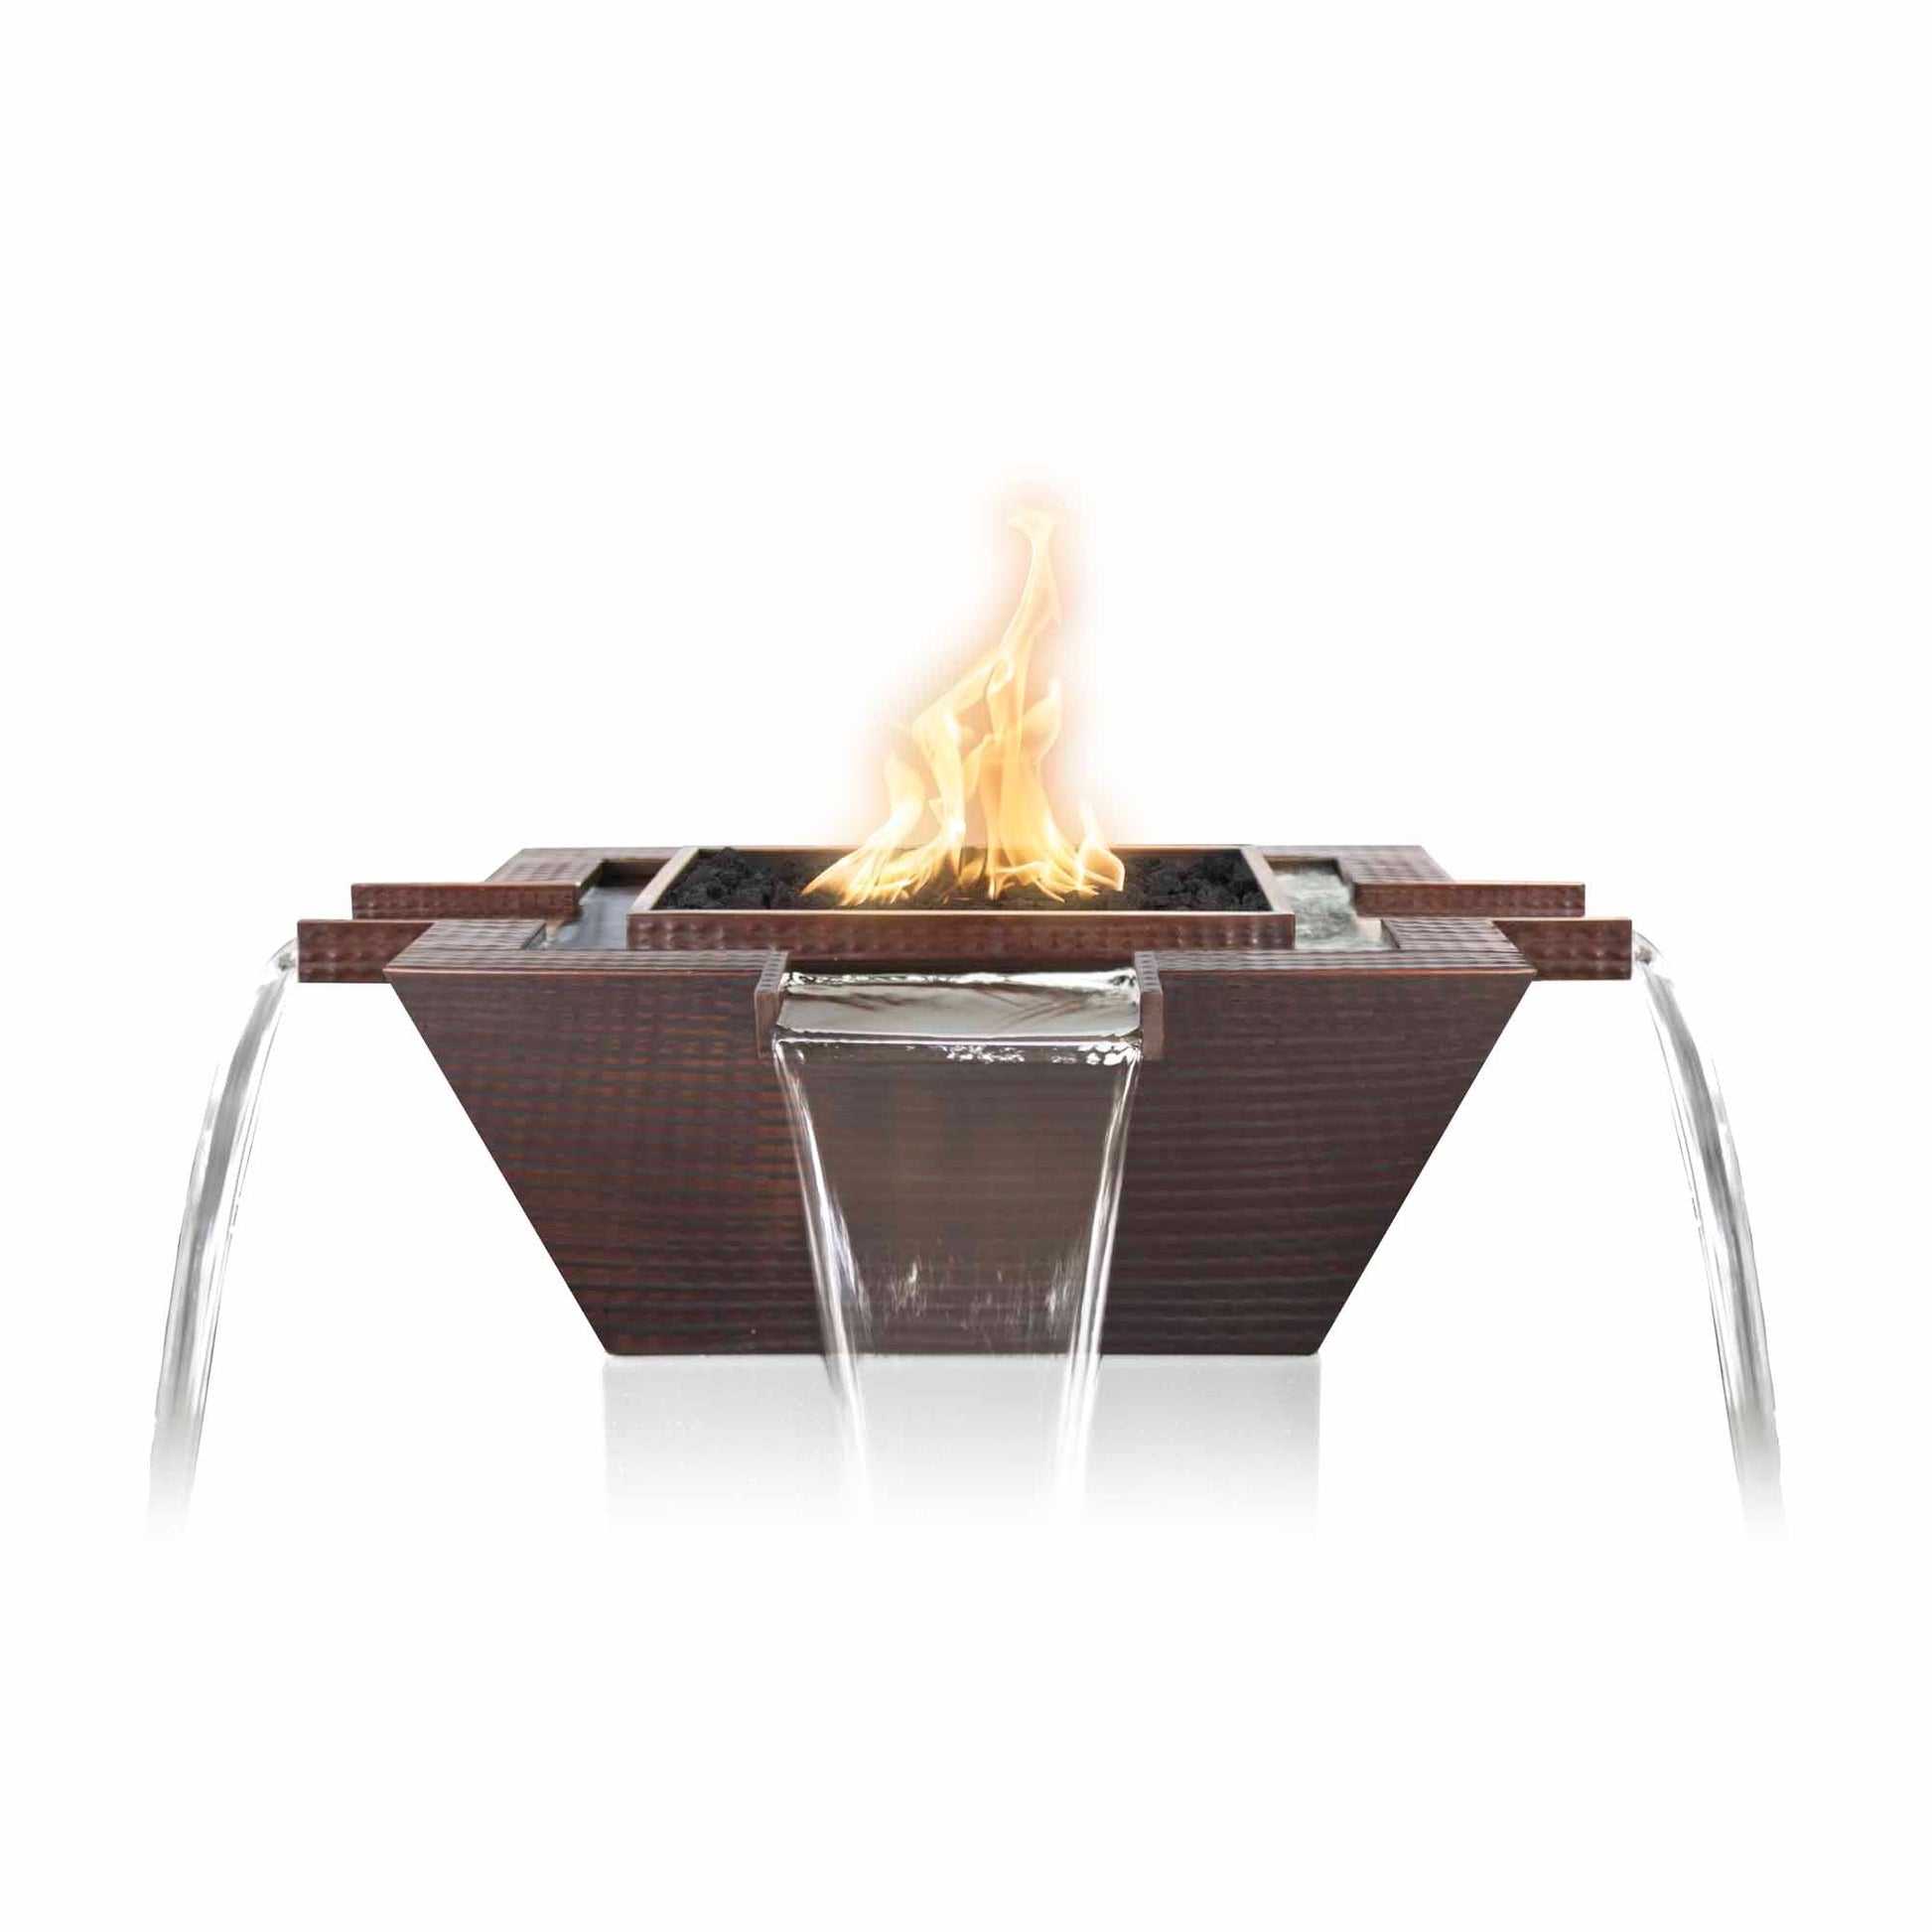 The Outdoor Plus Square Maya 36" White Powder Coated Metal Liquid Propane Fire & Water Bowl 4-Way Spill with Match Lit Ignition